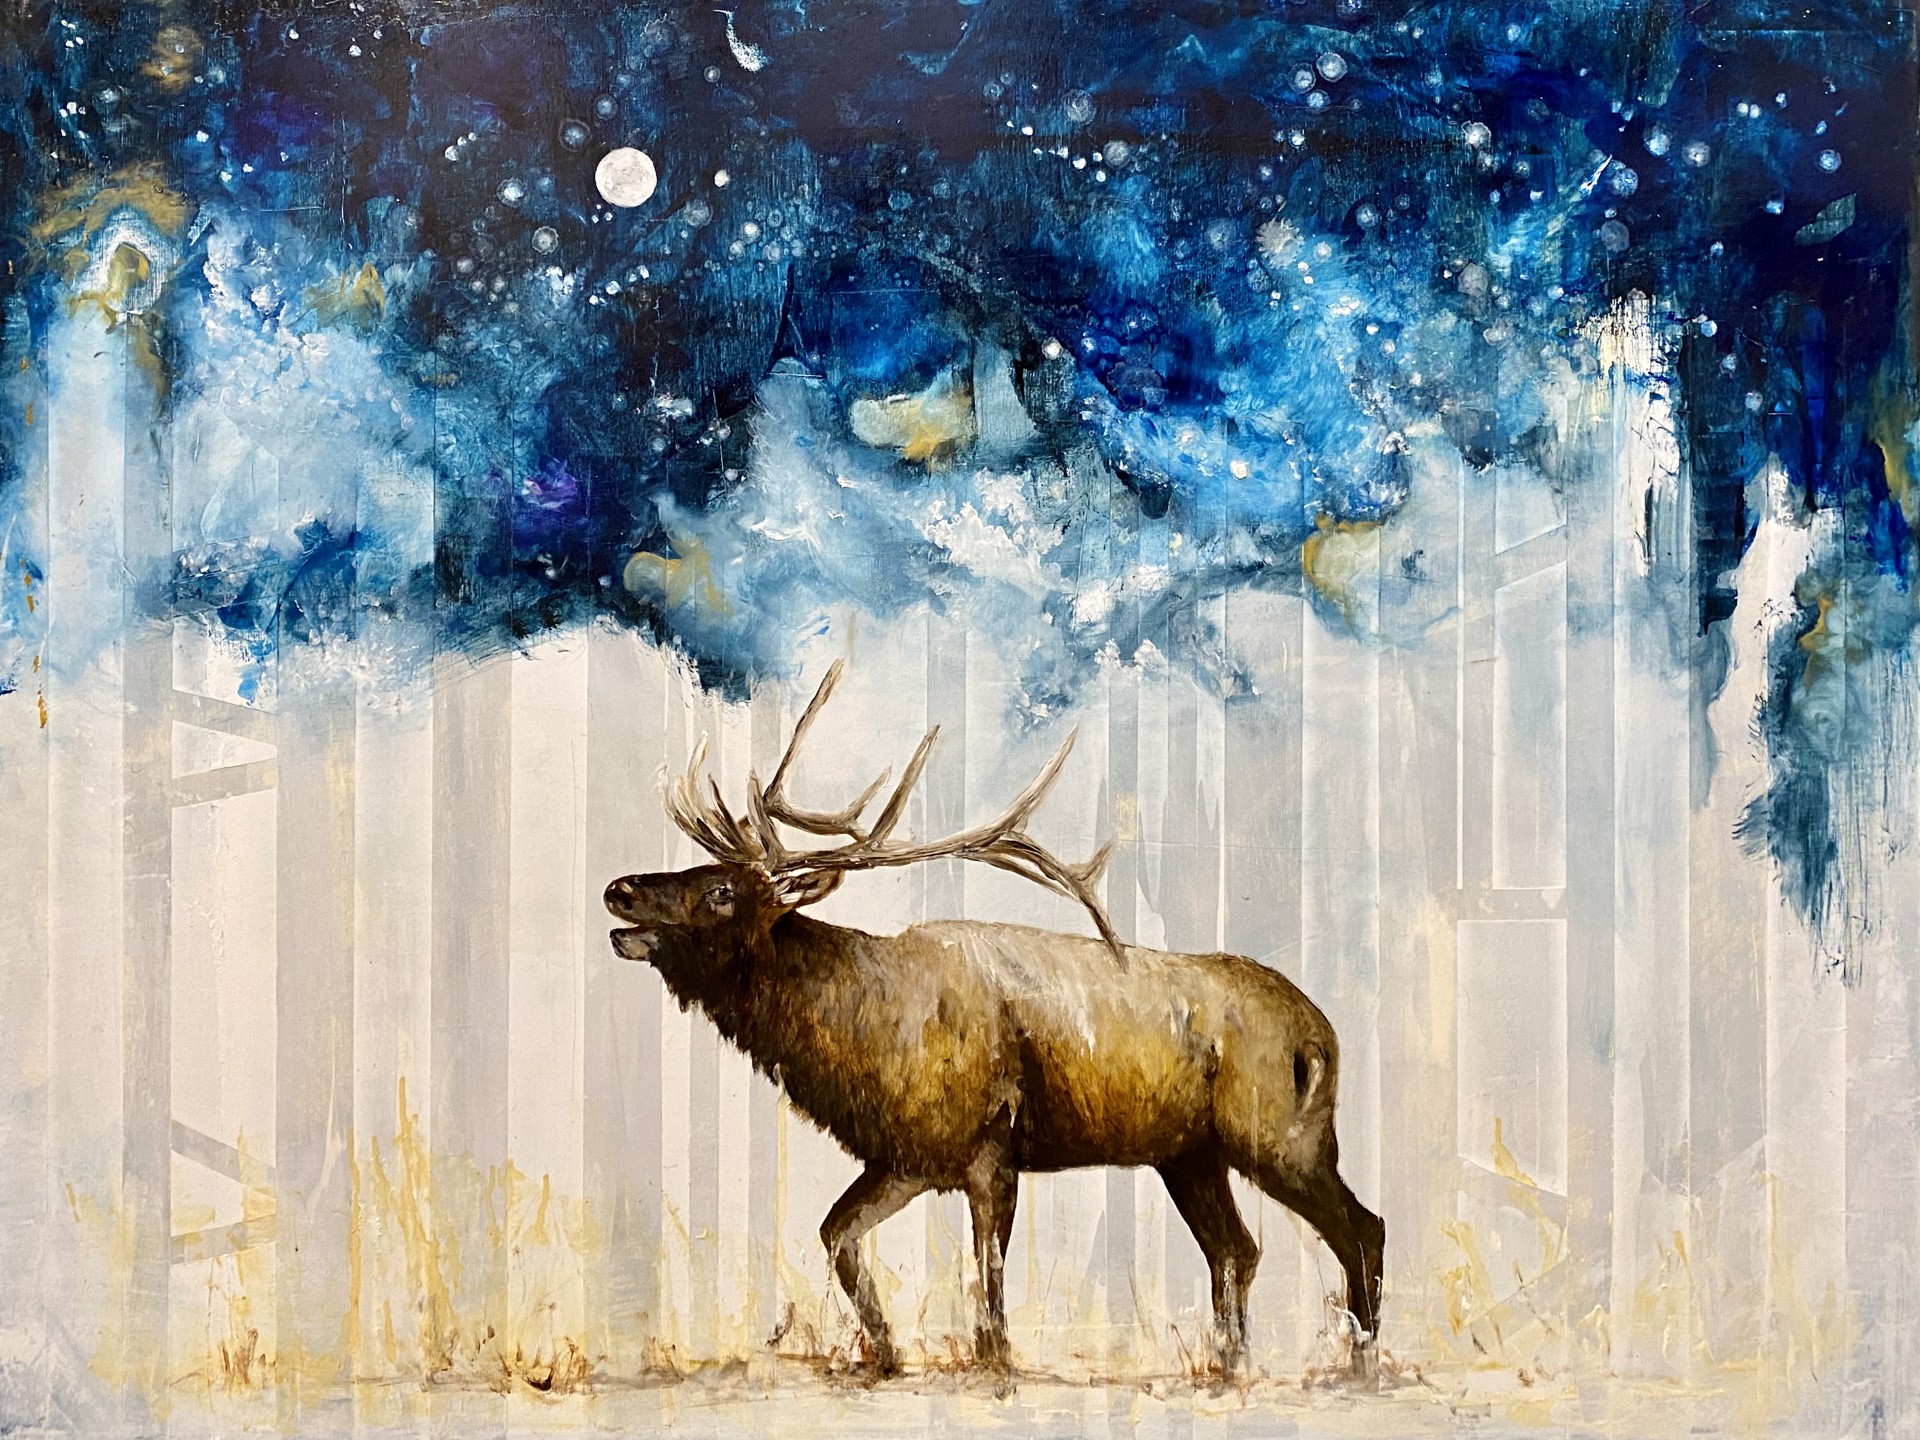 A Contemporary Oil Painting Of A Bull Elk Walking With A Night Sky By Jenna Von Benedikt Available At Gallery Wild